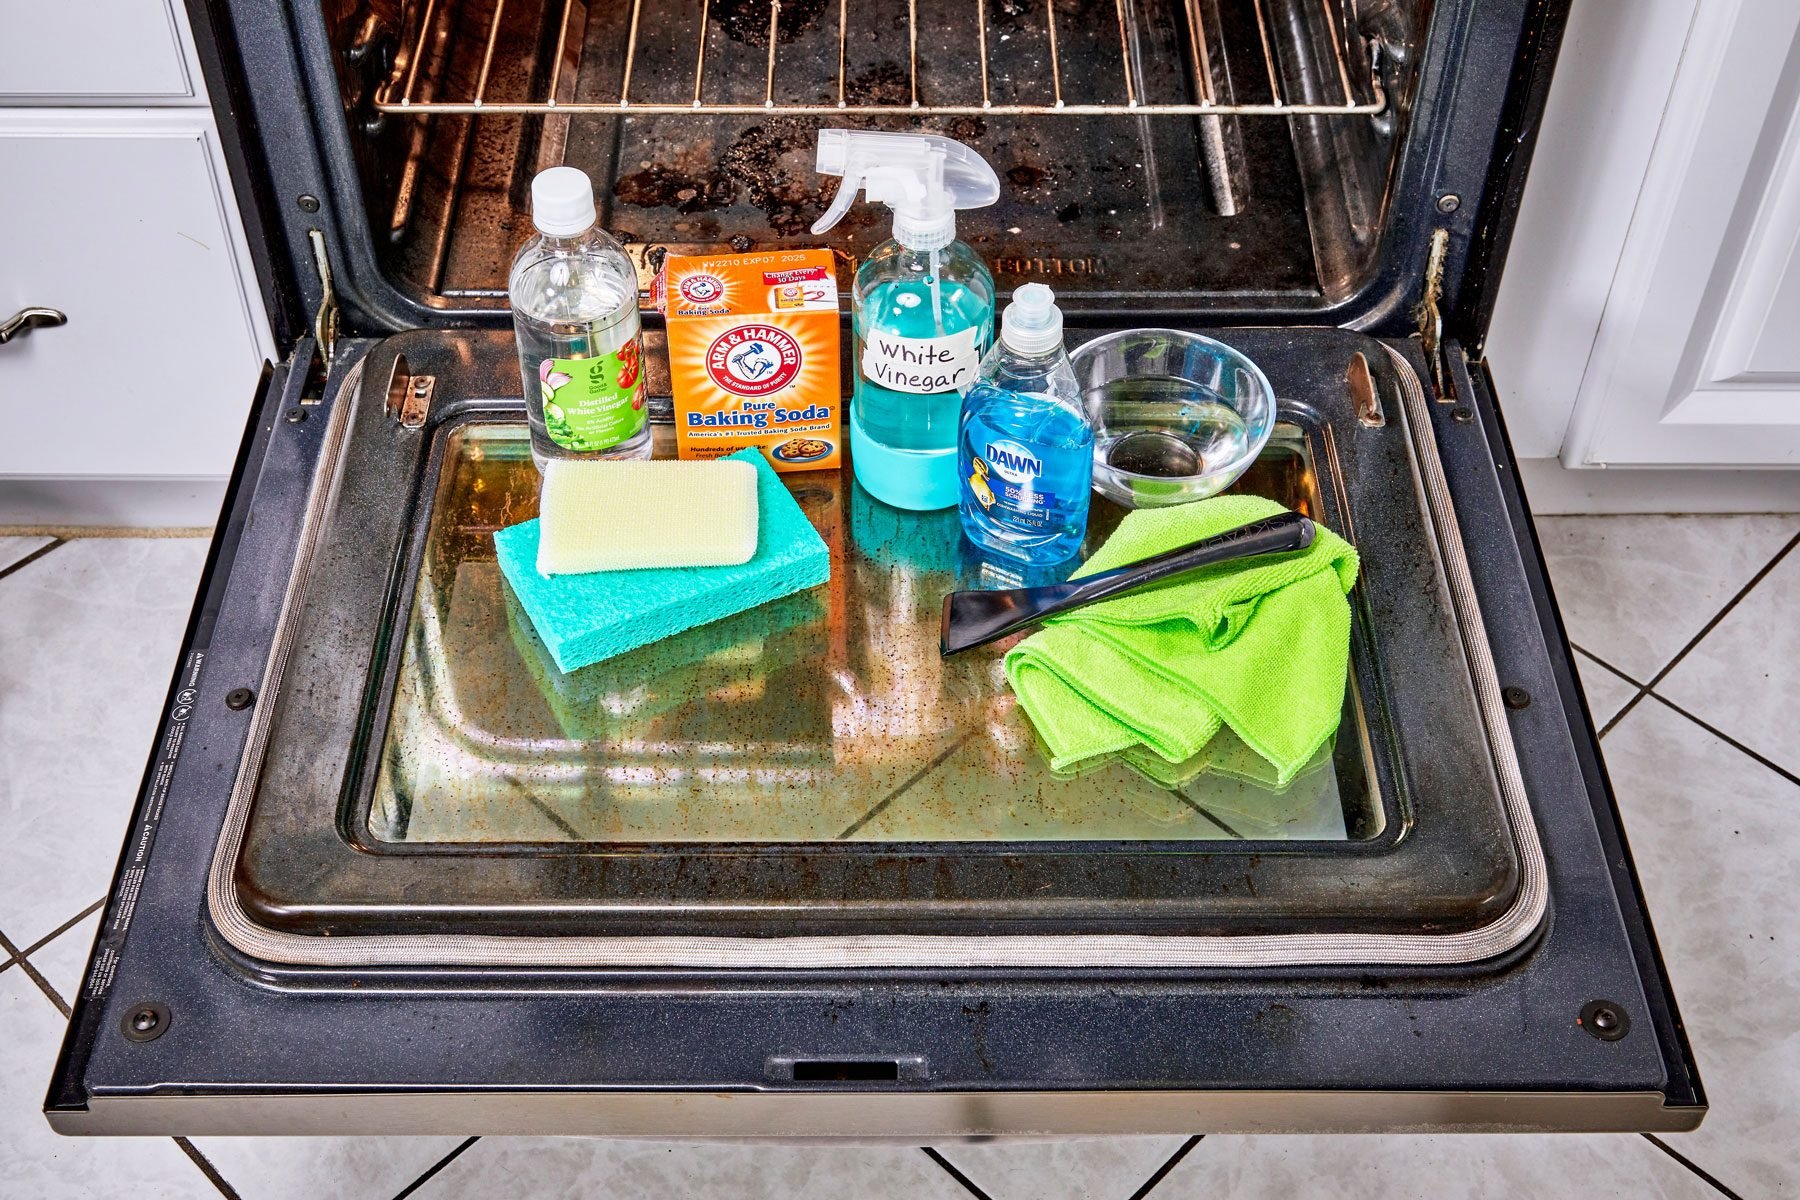 Oven Cleaning Tool Kit, Oven Cleaning Machine